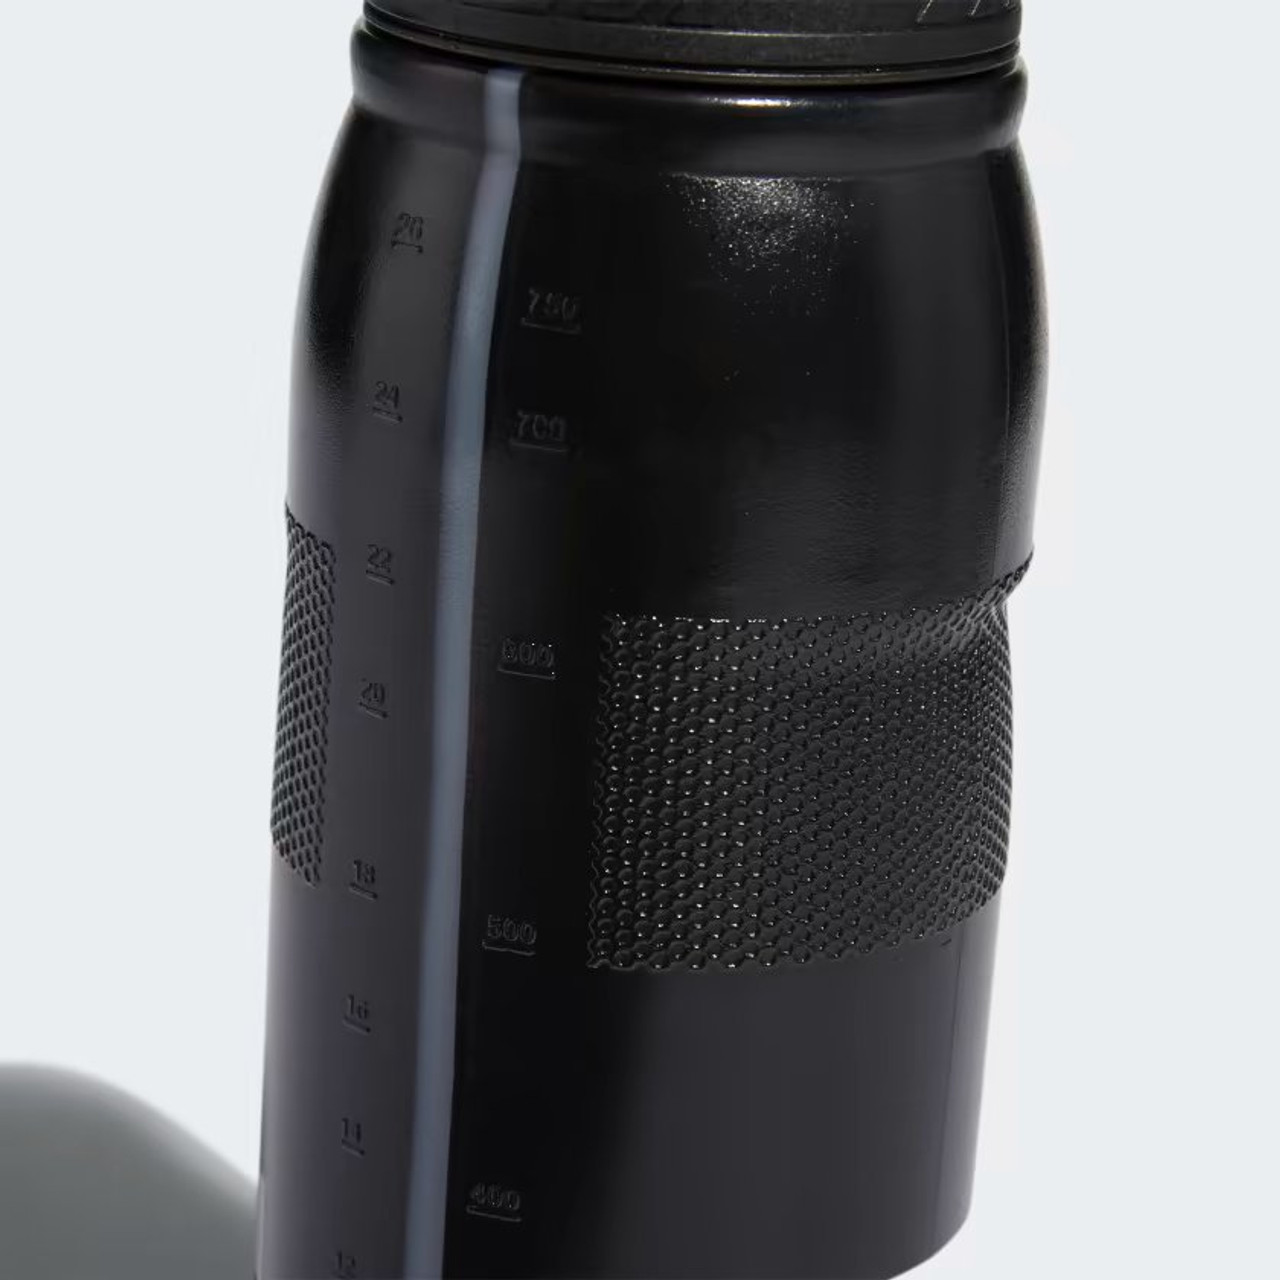 https://cdn11.bigcommerce.com/s-tn8o8k48s5/images/stencil/1280x1280/products/22564/73180/Stadium_Water_Bottle_750_ML_Black_EW4901_41_detail_hover__46129.1697058636.jpg?c=1&imbypass=on